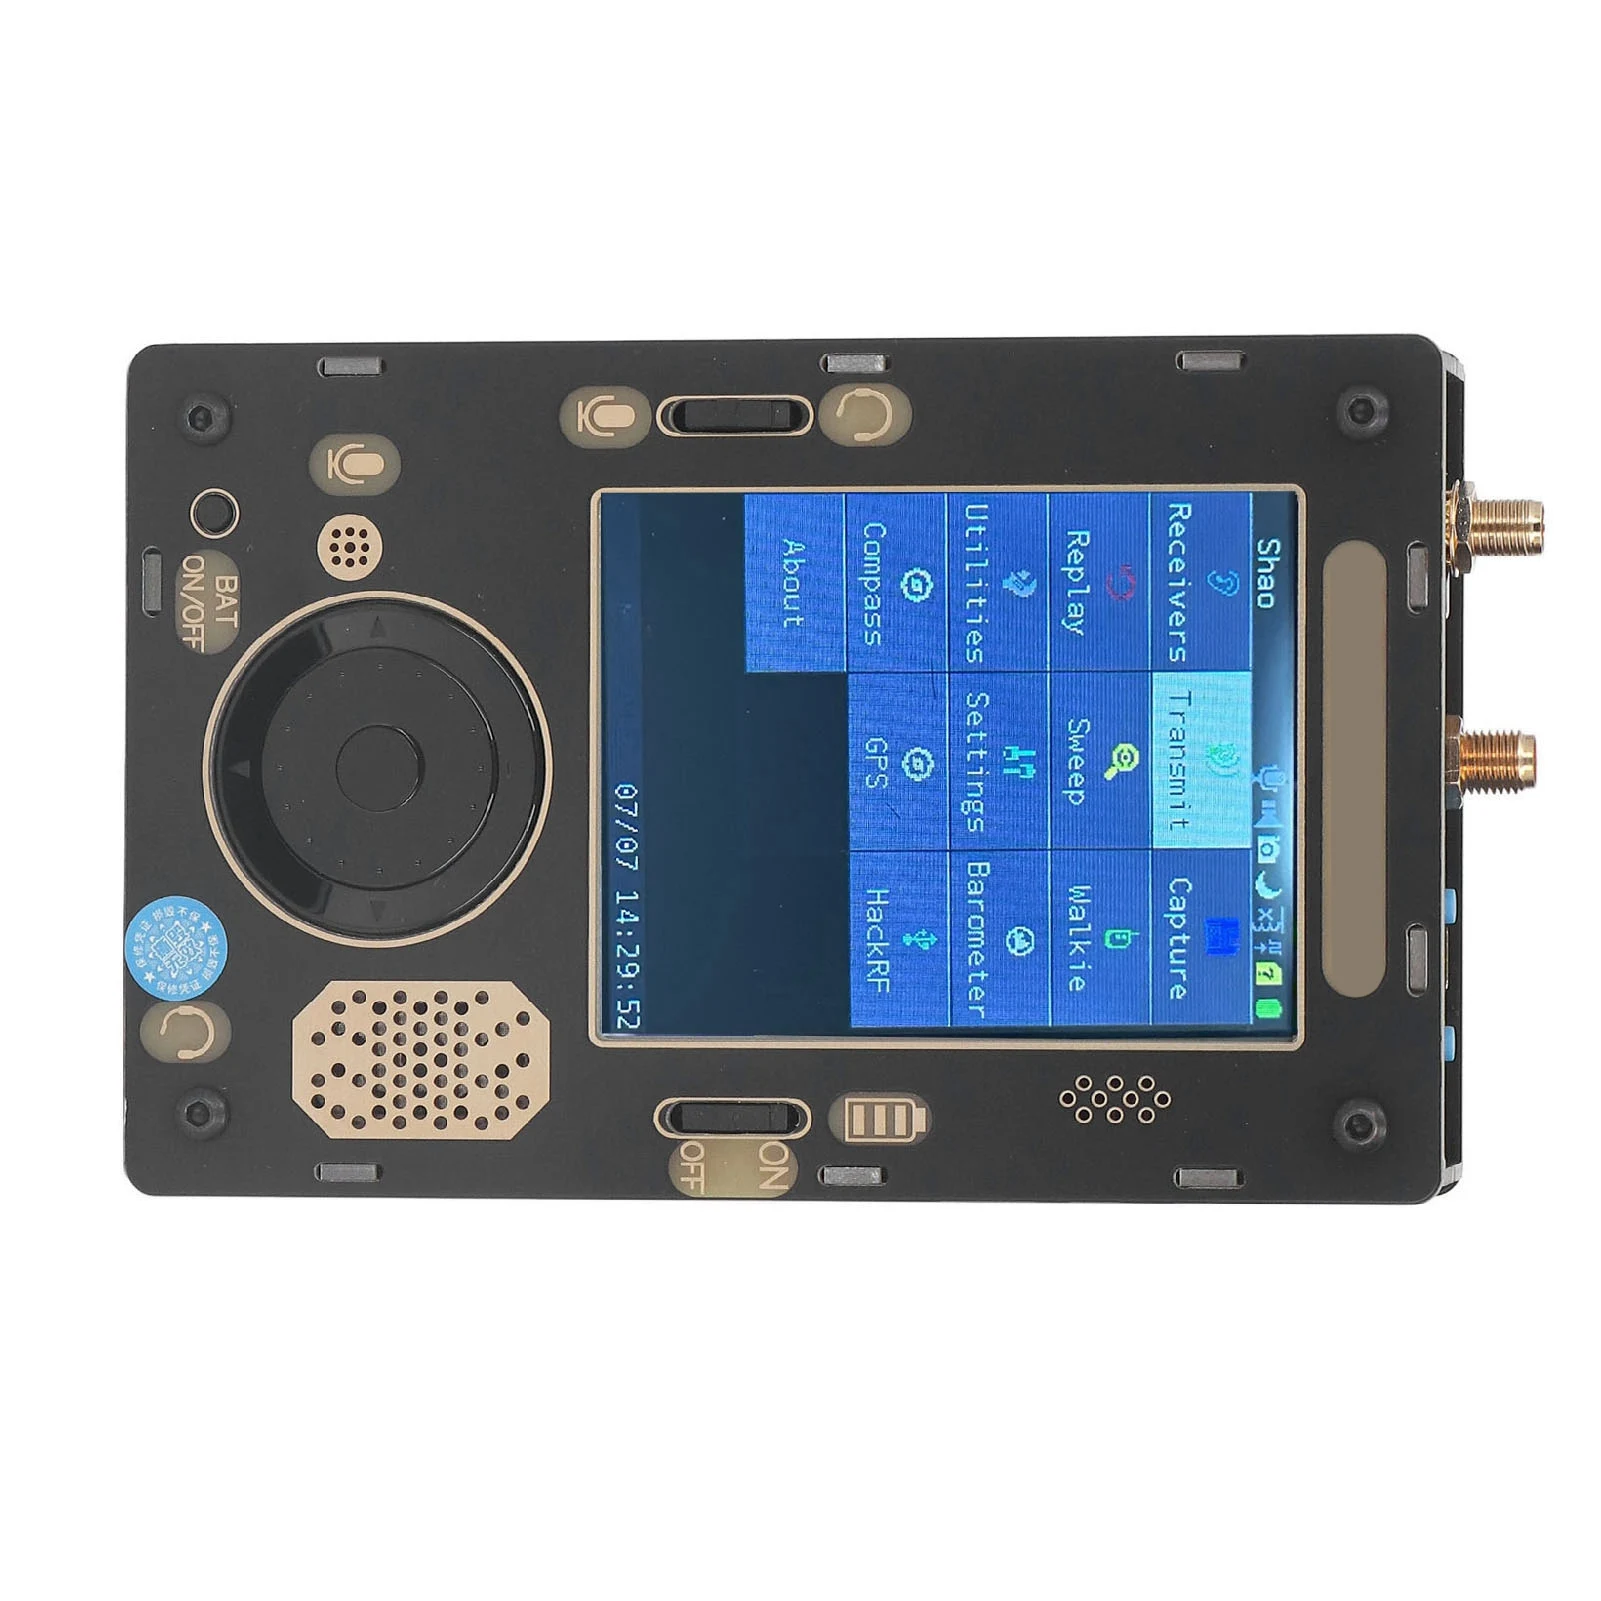 SDR Radio Transceiver USB2.0 Interface Radio Transceiver 1MHz To 6GHz 20MHz  RF Bandwidth for Communication Technology Research AliExpress